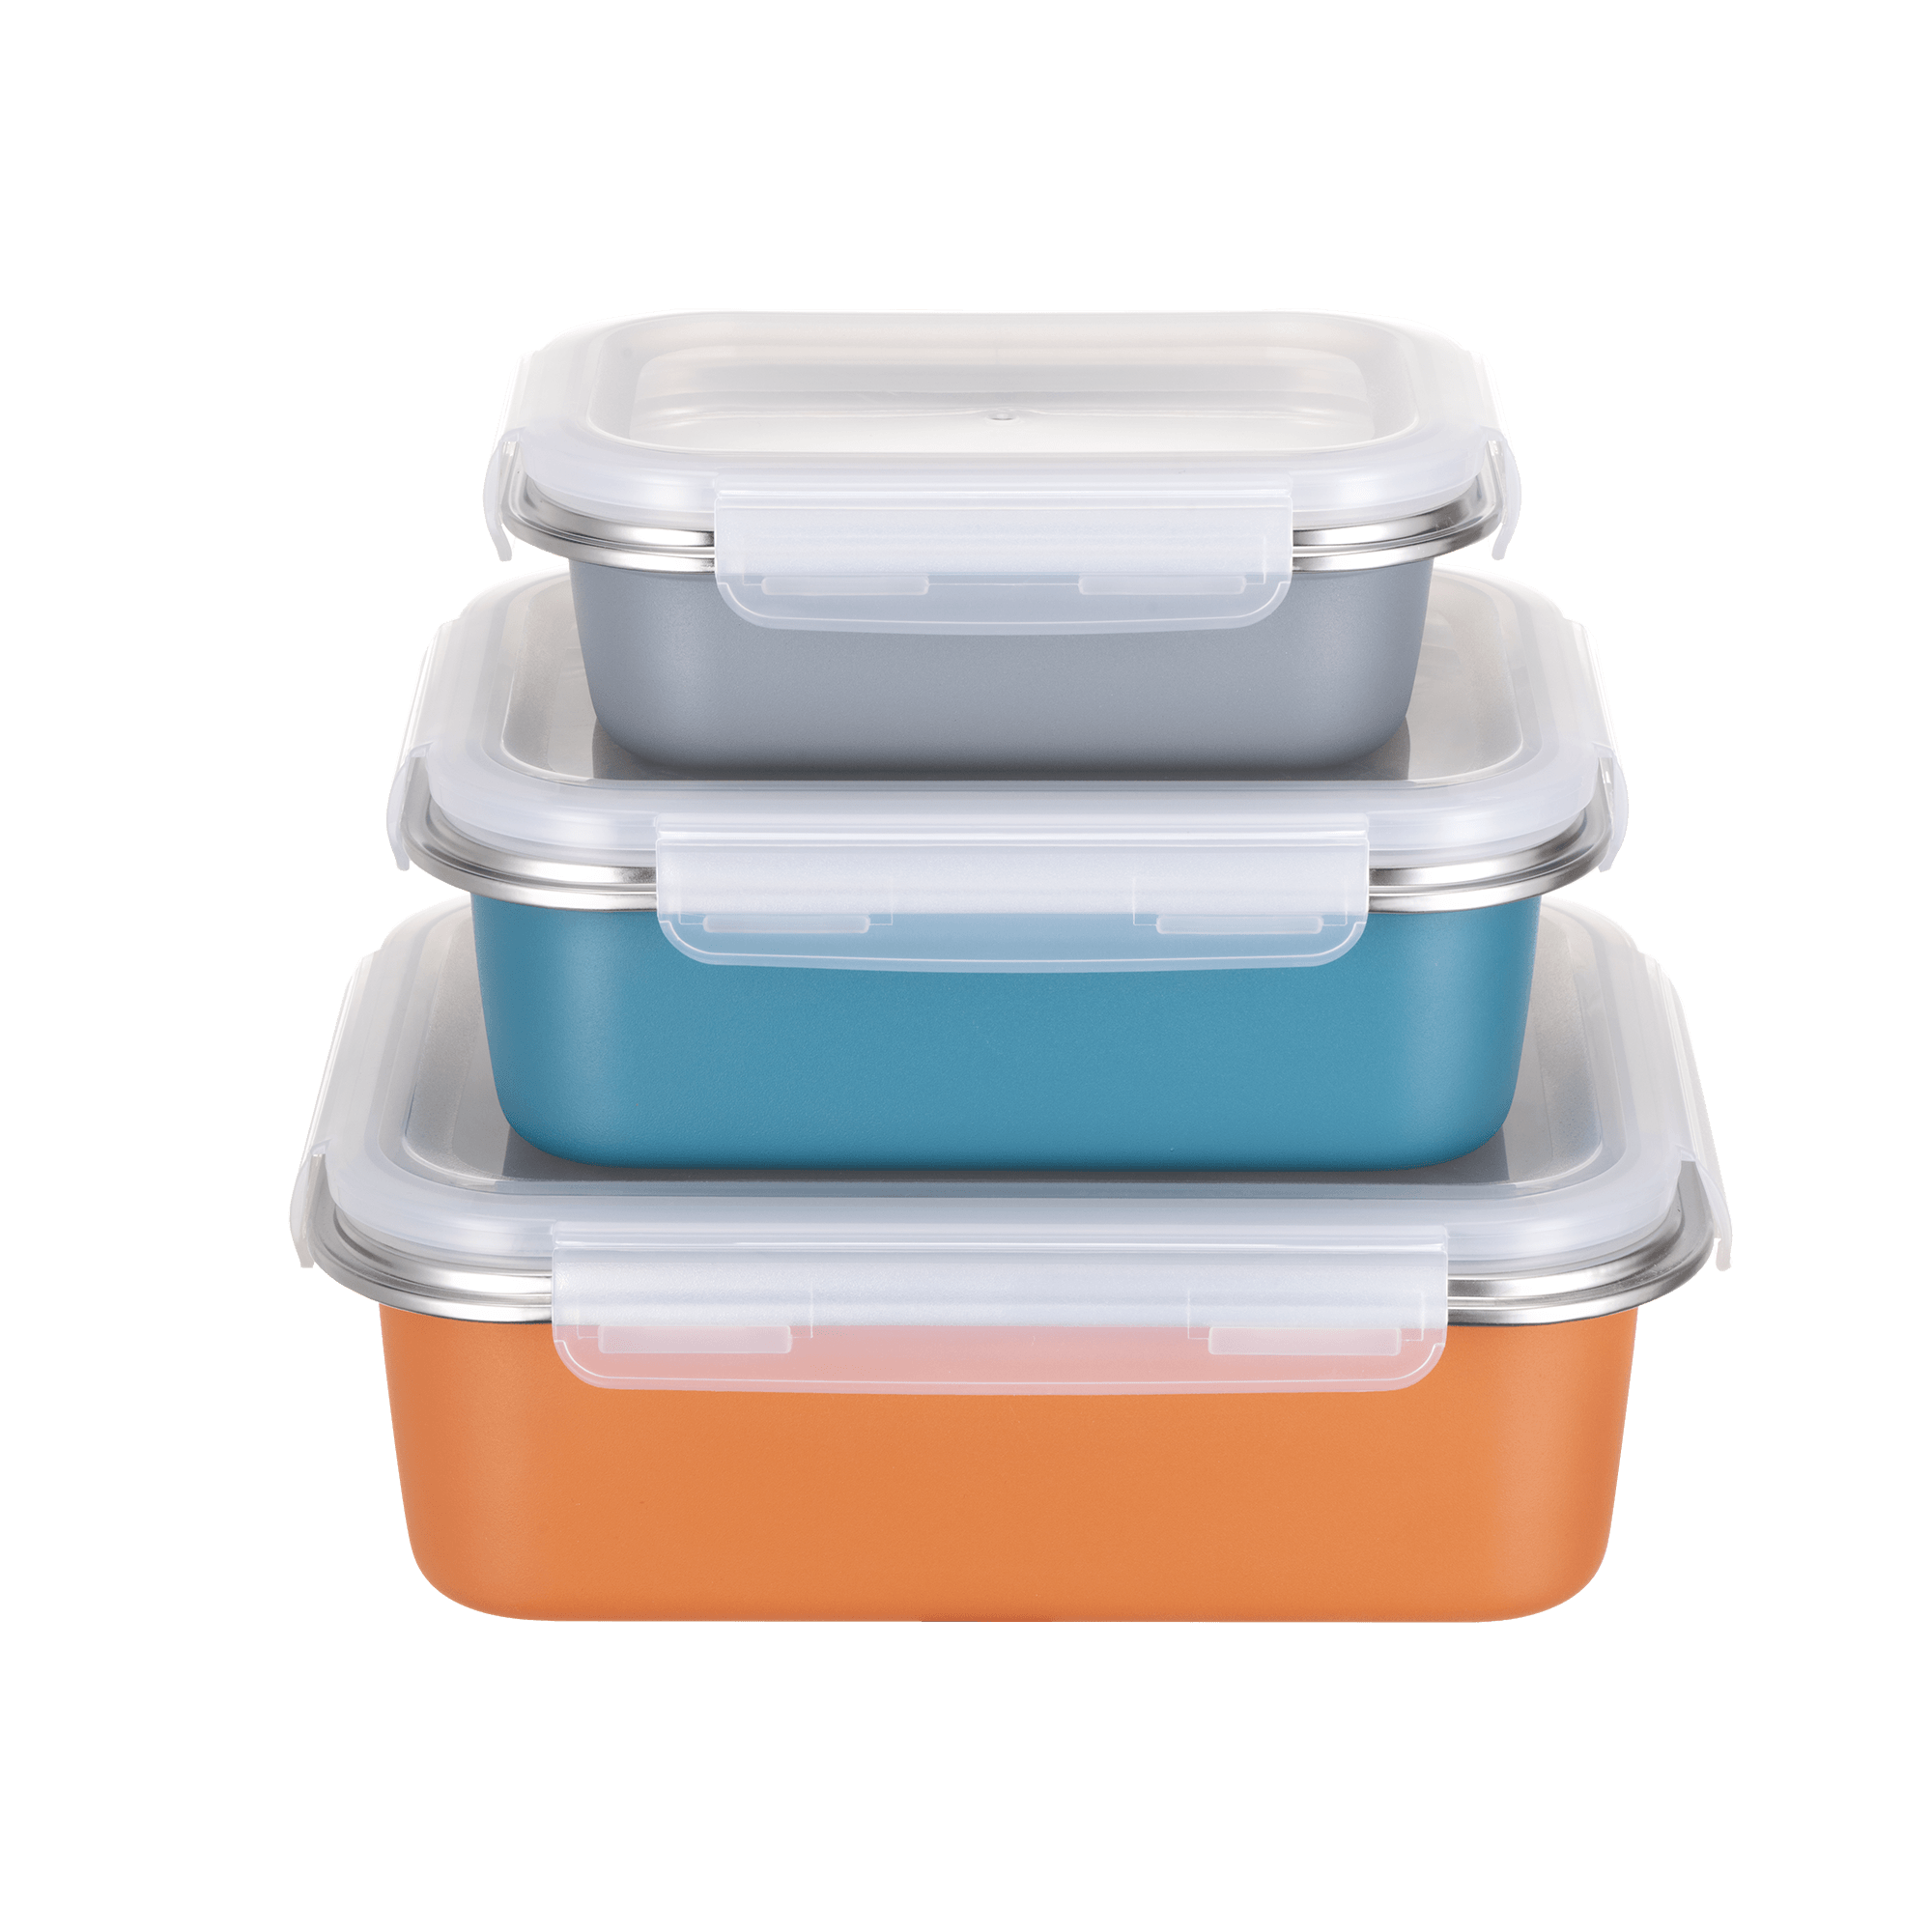 GC GENICOOK Stainless steel food storage containers leak proof & airtight  lids for Kitchen,stainless steel bowl,meal prep lunch box,freezer and